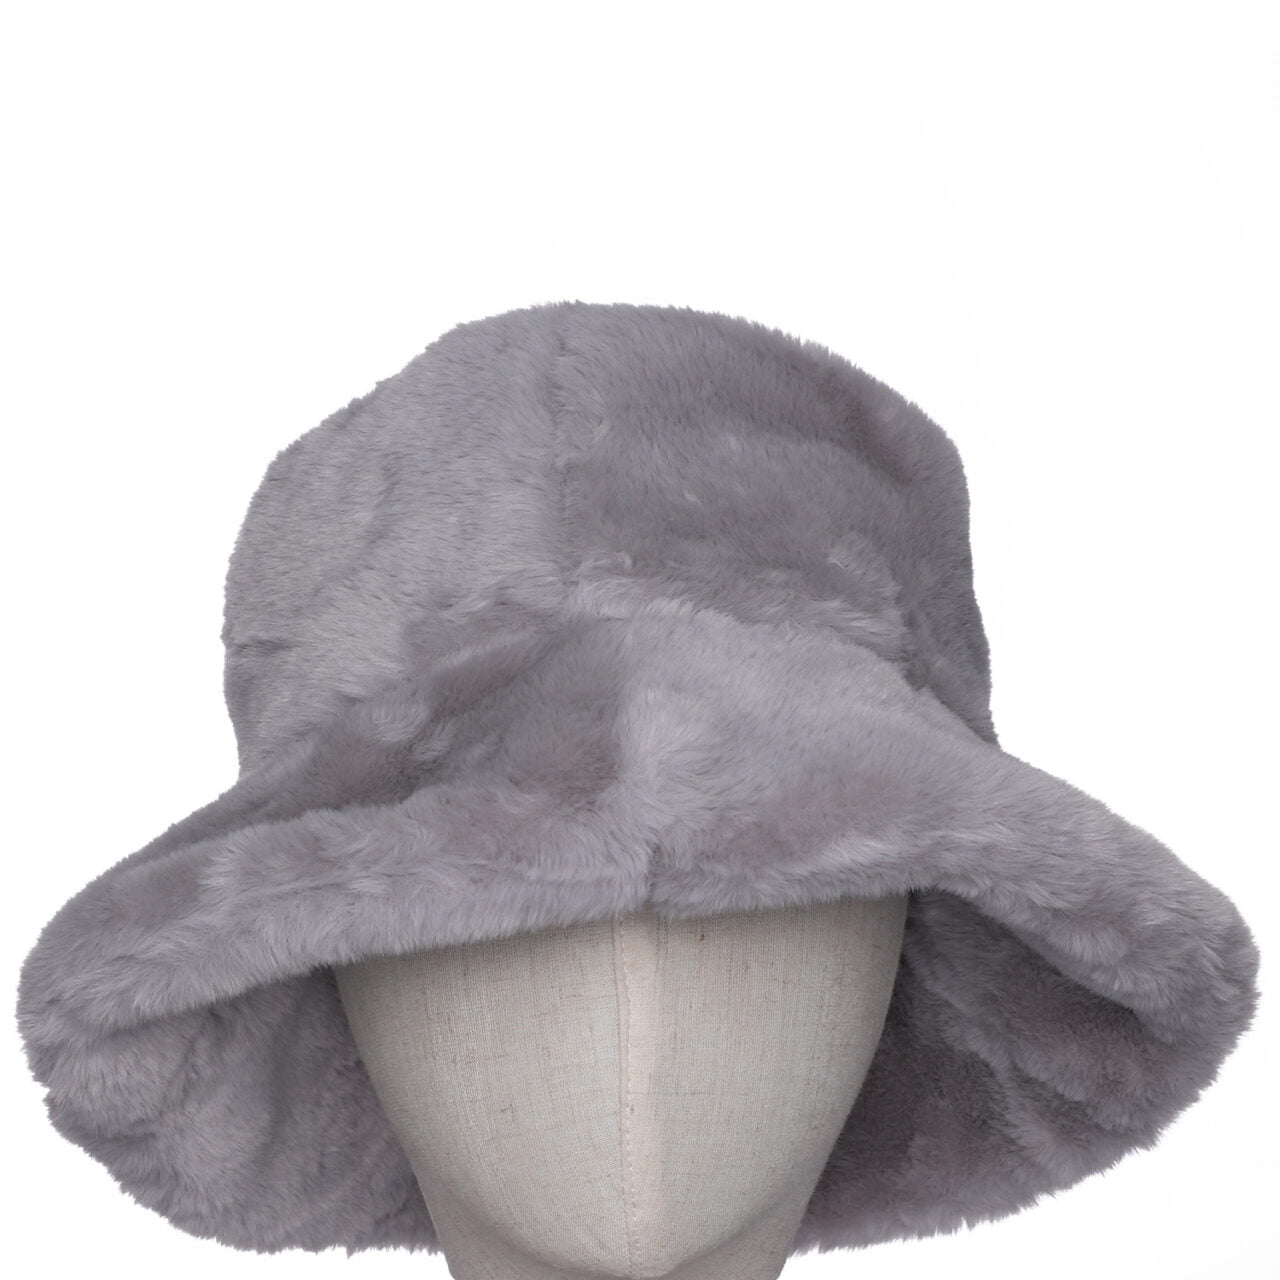 Fab Gifts | Winter Accessories Faux Fur Bucket Hat Grey by Weirs of Baggot Street